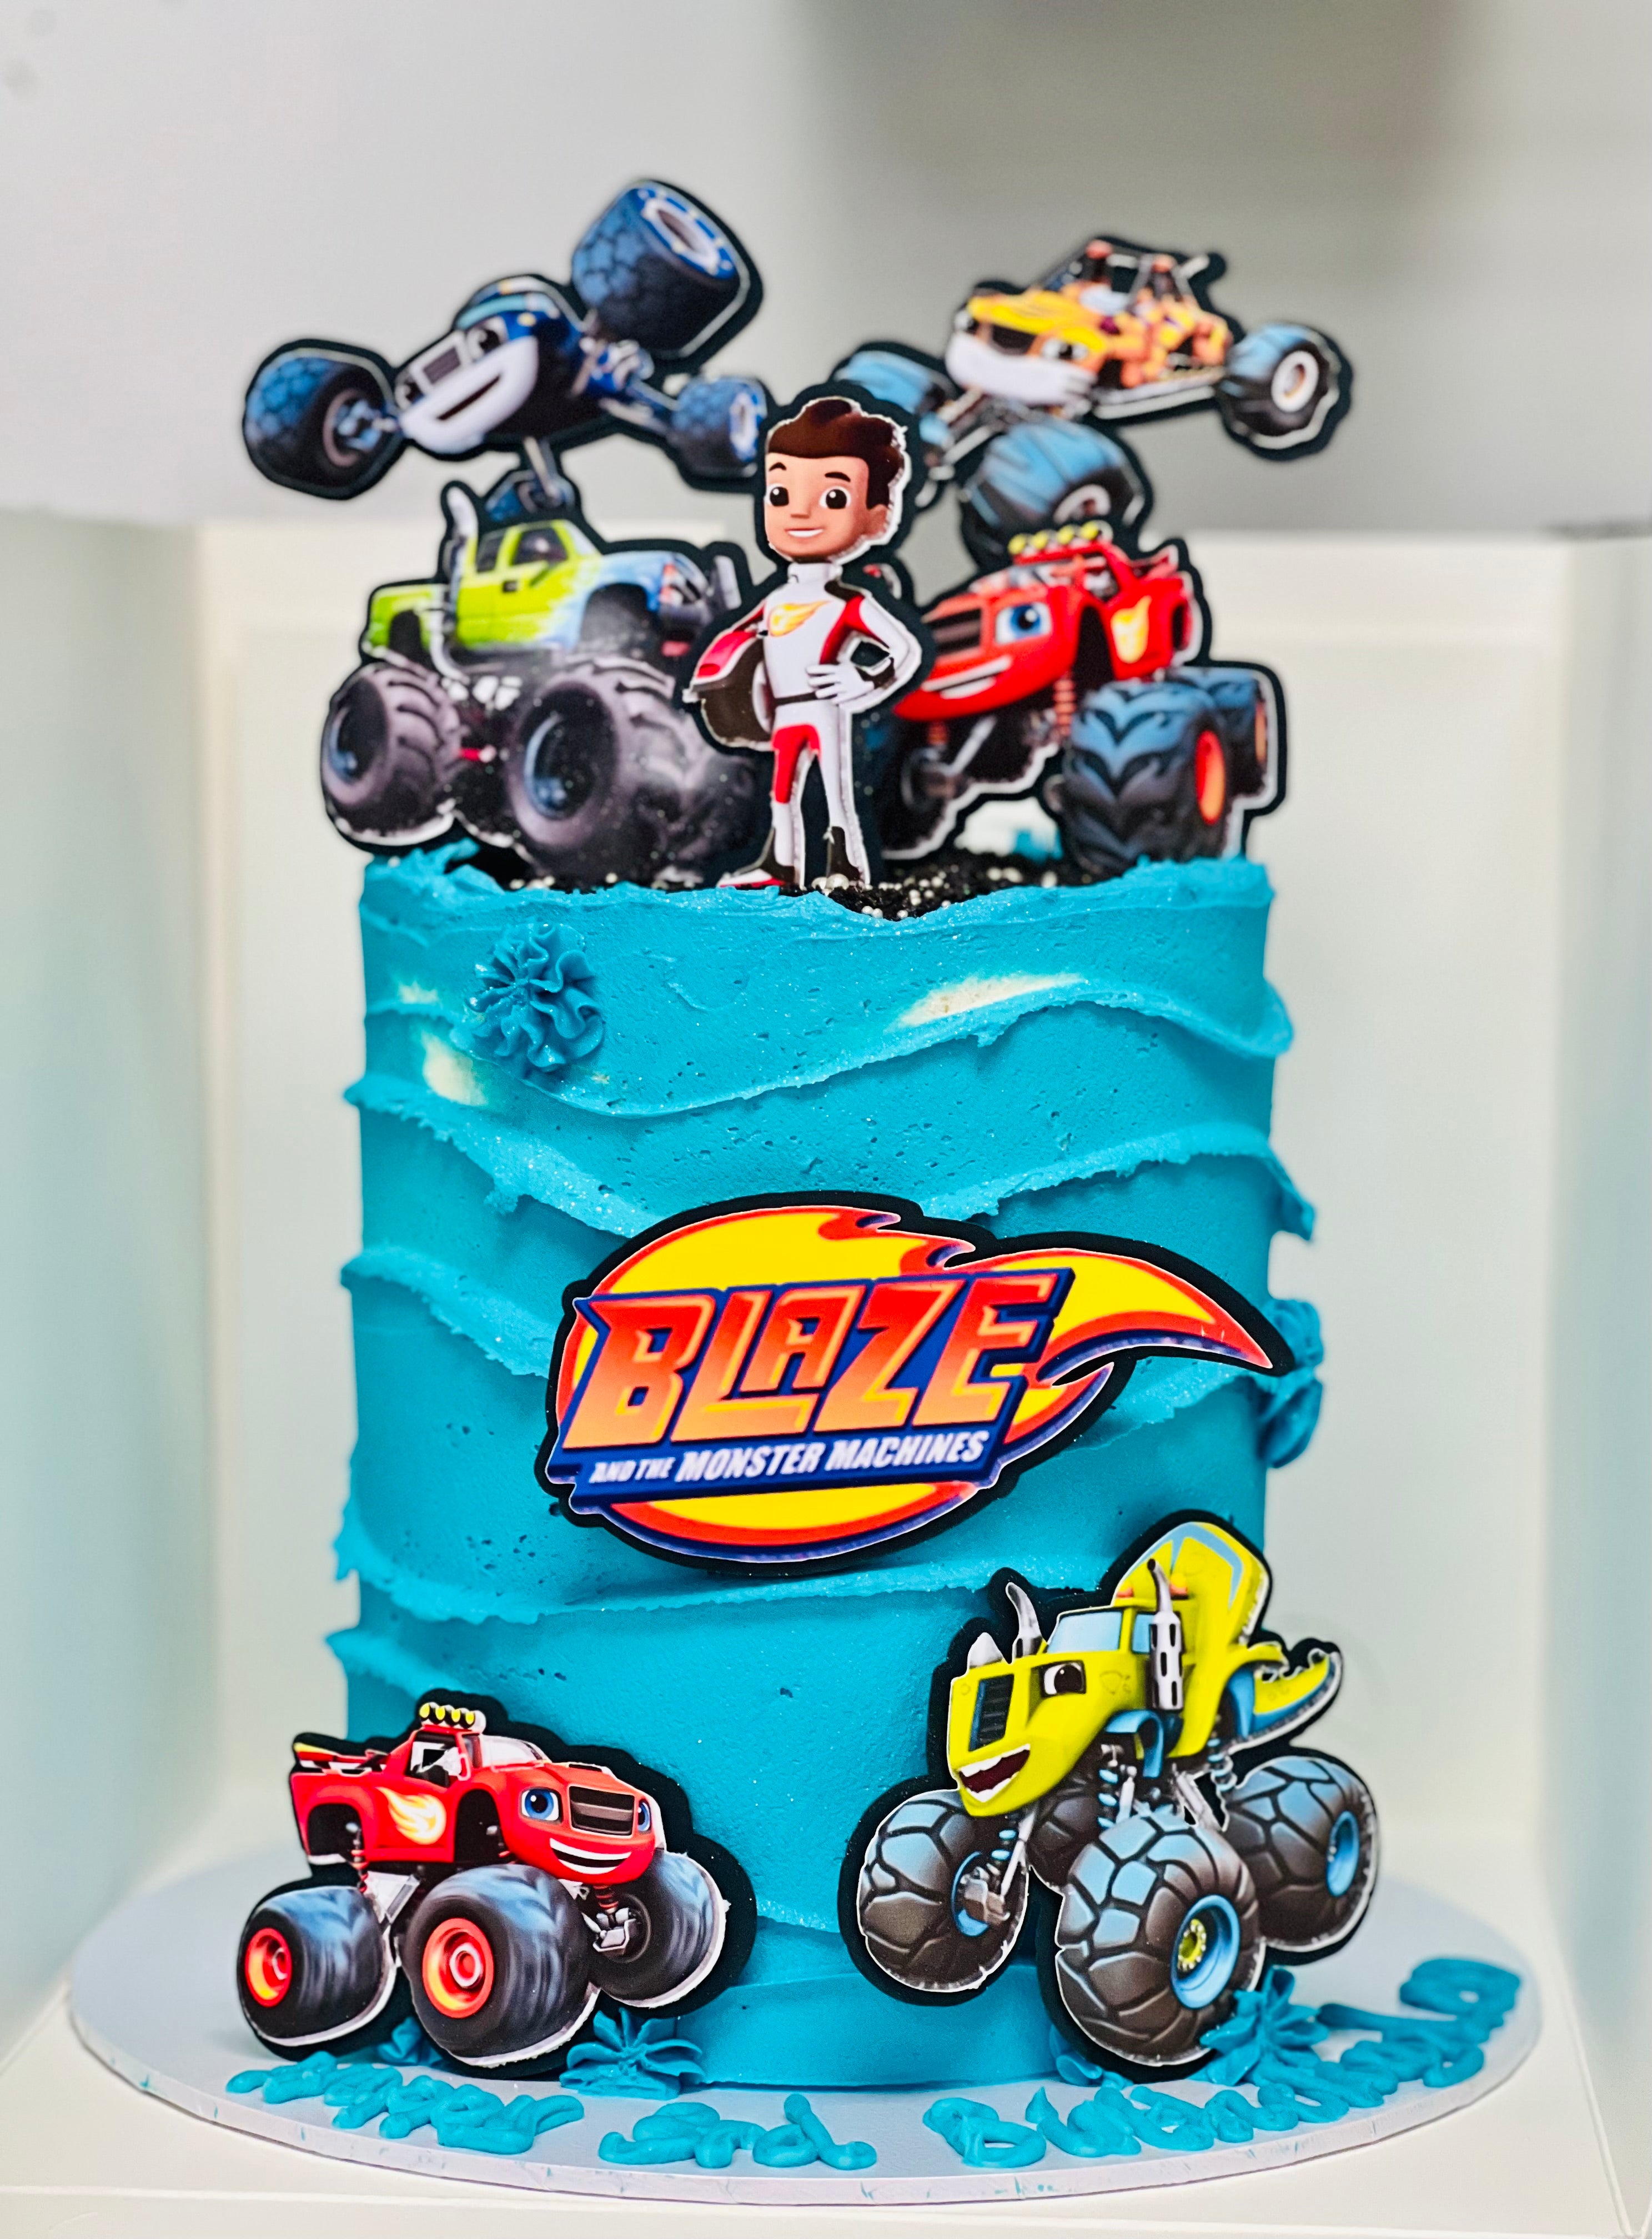 Blaze and the Monster Machine - Decorated Cake by Phey - CakesDecor